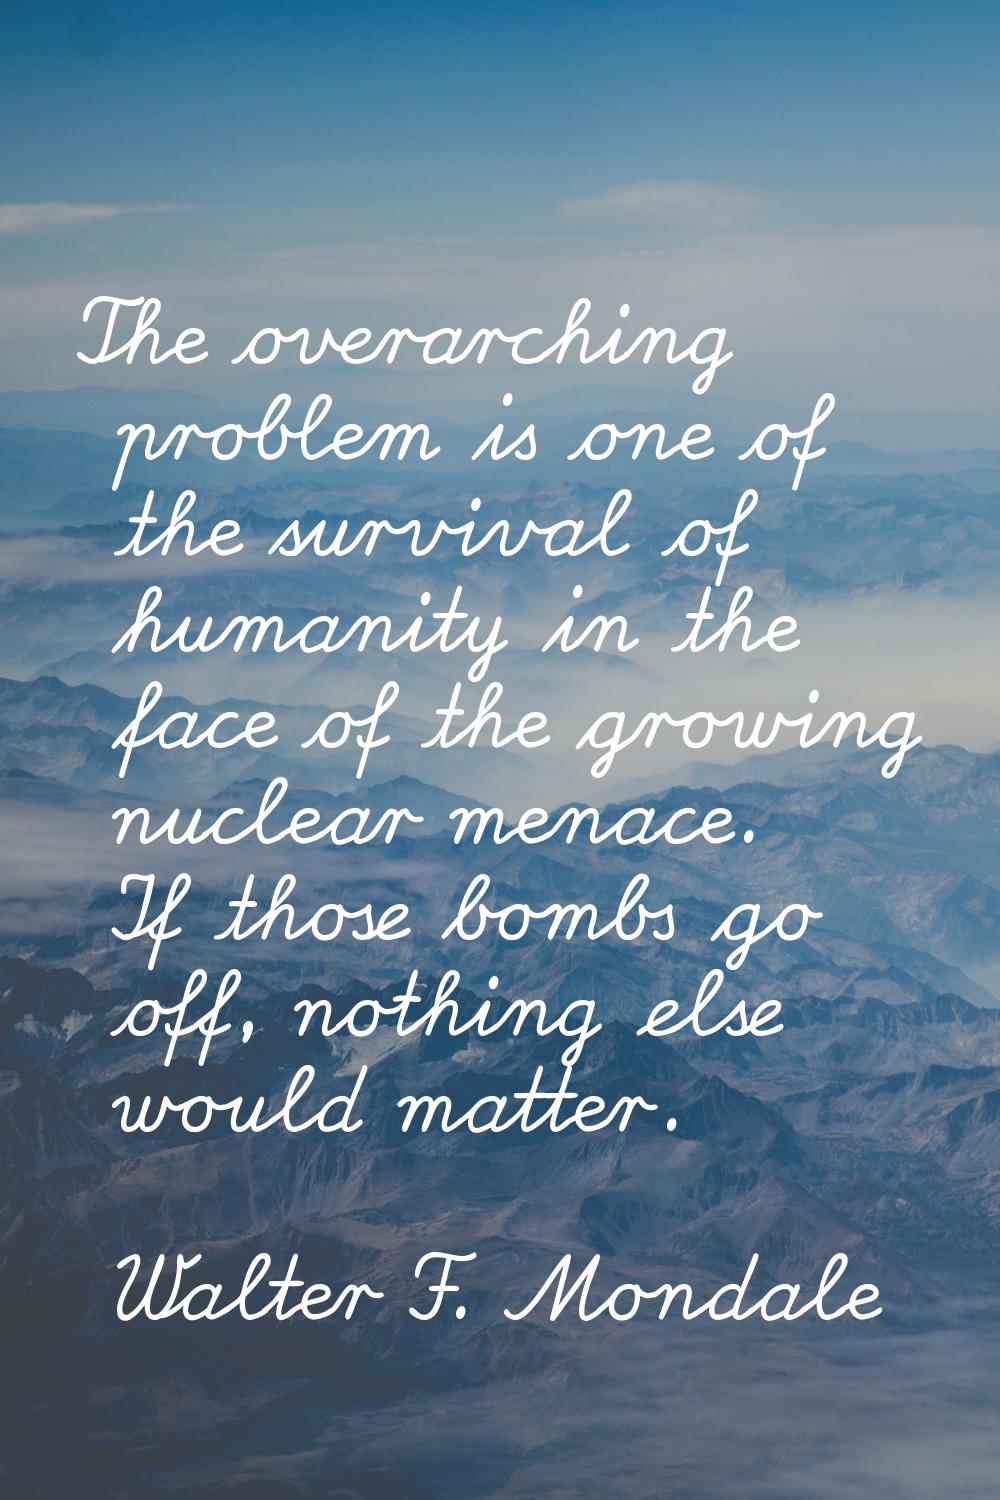 The overarching problem is one of the survival of humanity in the face of the growing nuclear menac